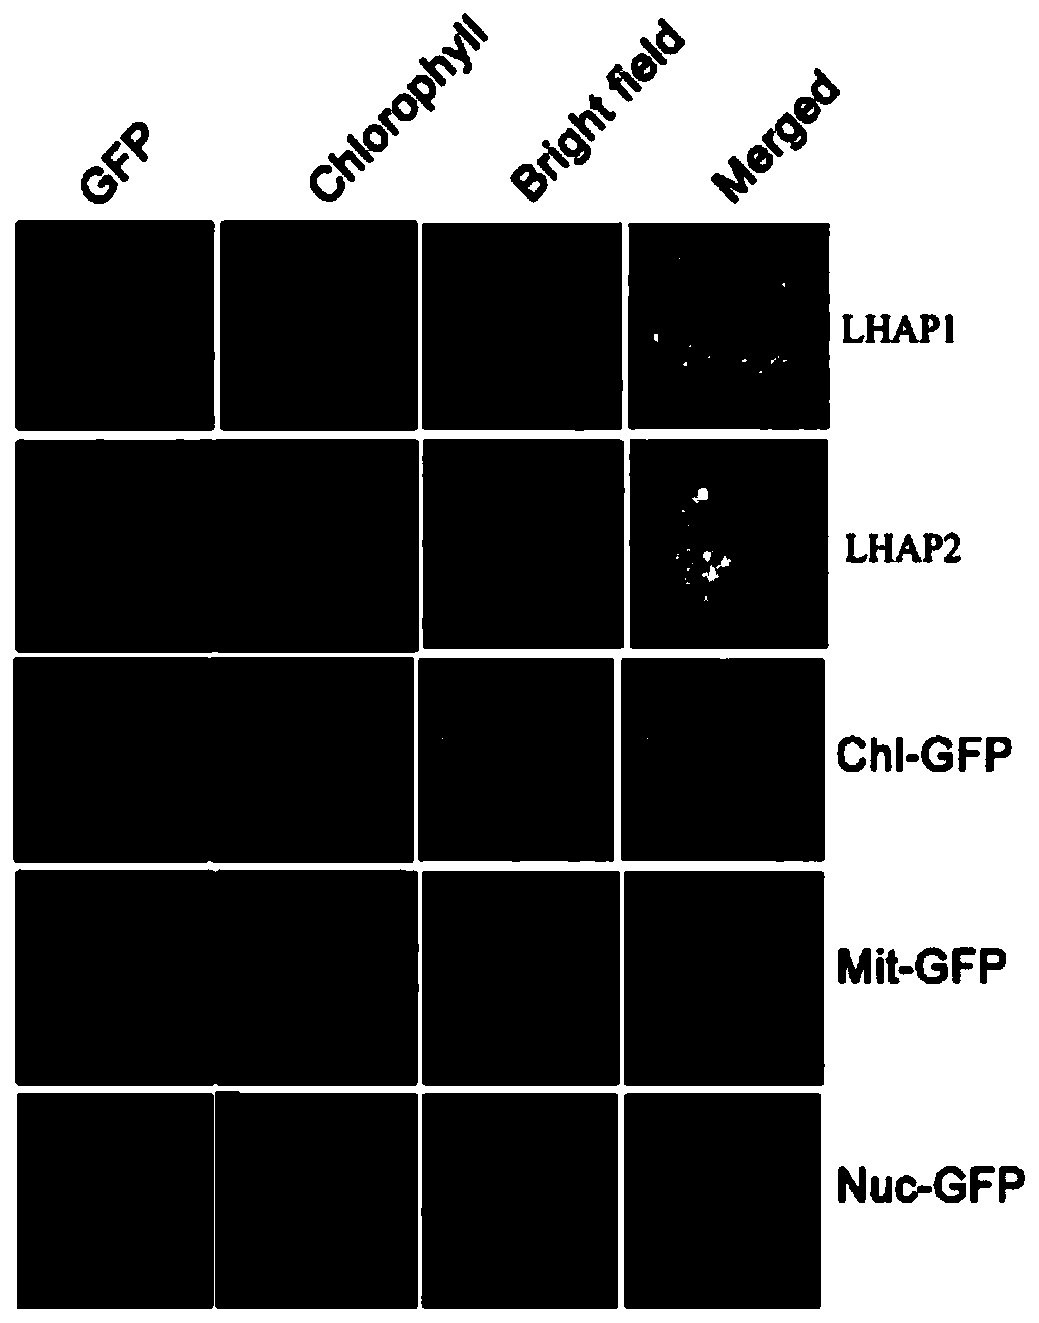 Application of lhap1 protein and its coding gene in regulating plant photosynthesis